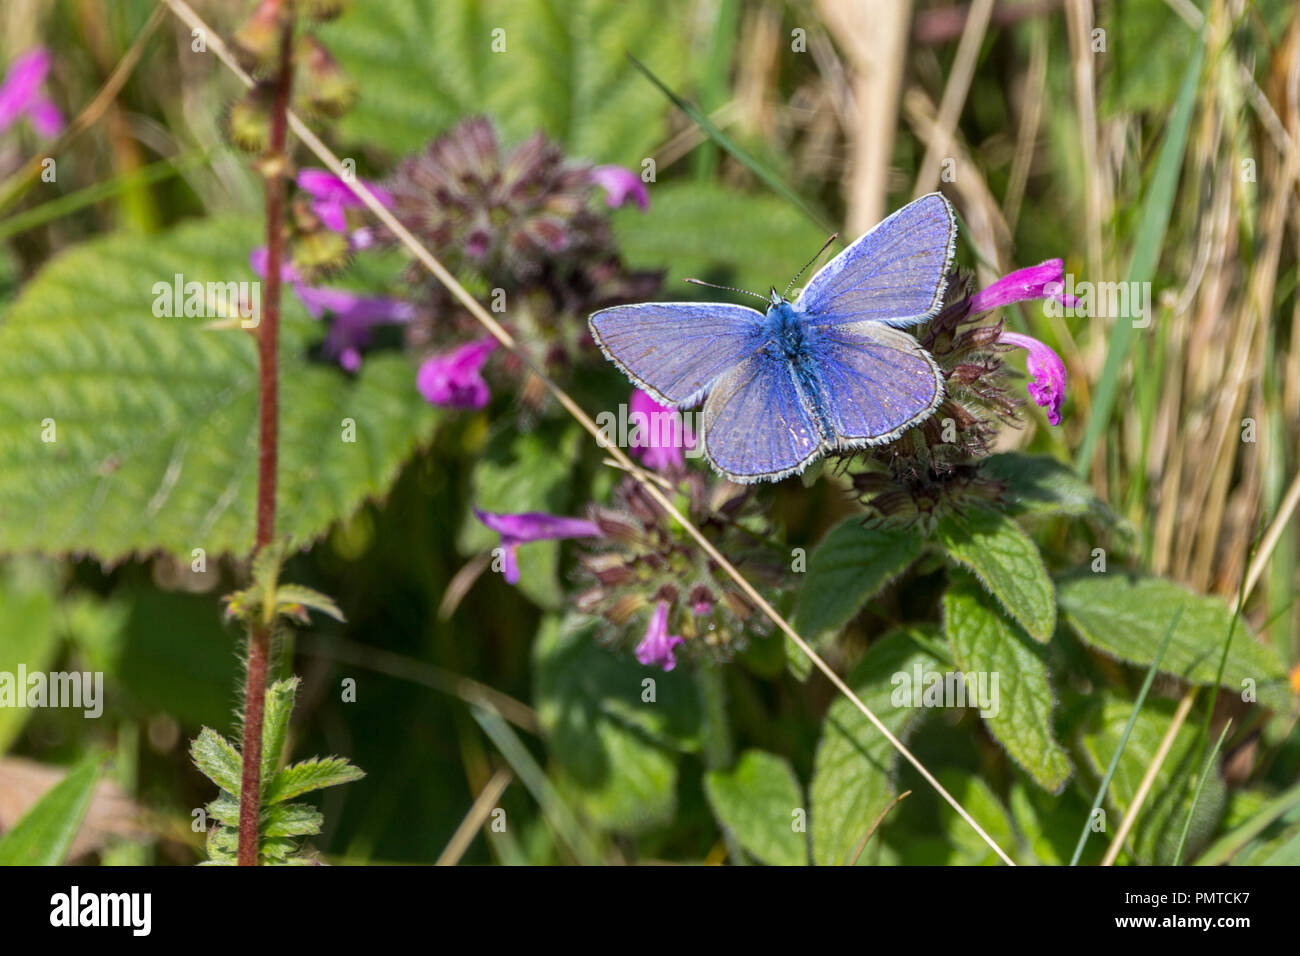 Common blue butterfly (Polyommatus icarus) on purple flowered vegetation. Coastal area semi woodland and meadow habitat. Open wings viewed from above. Stock Photo